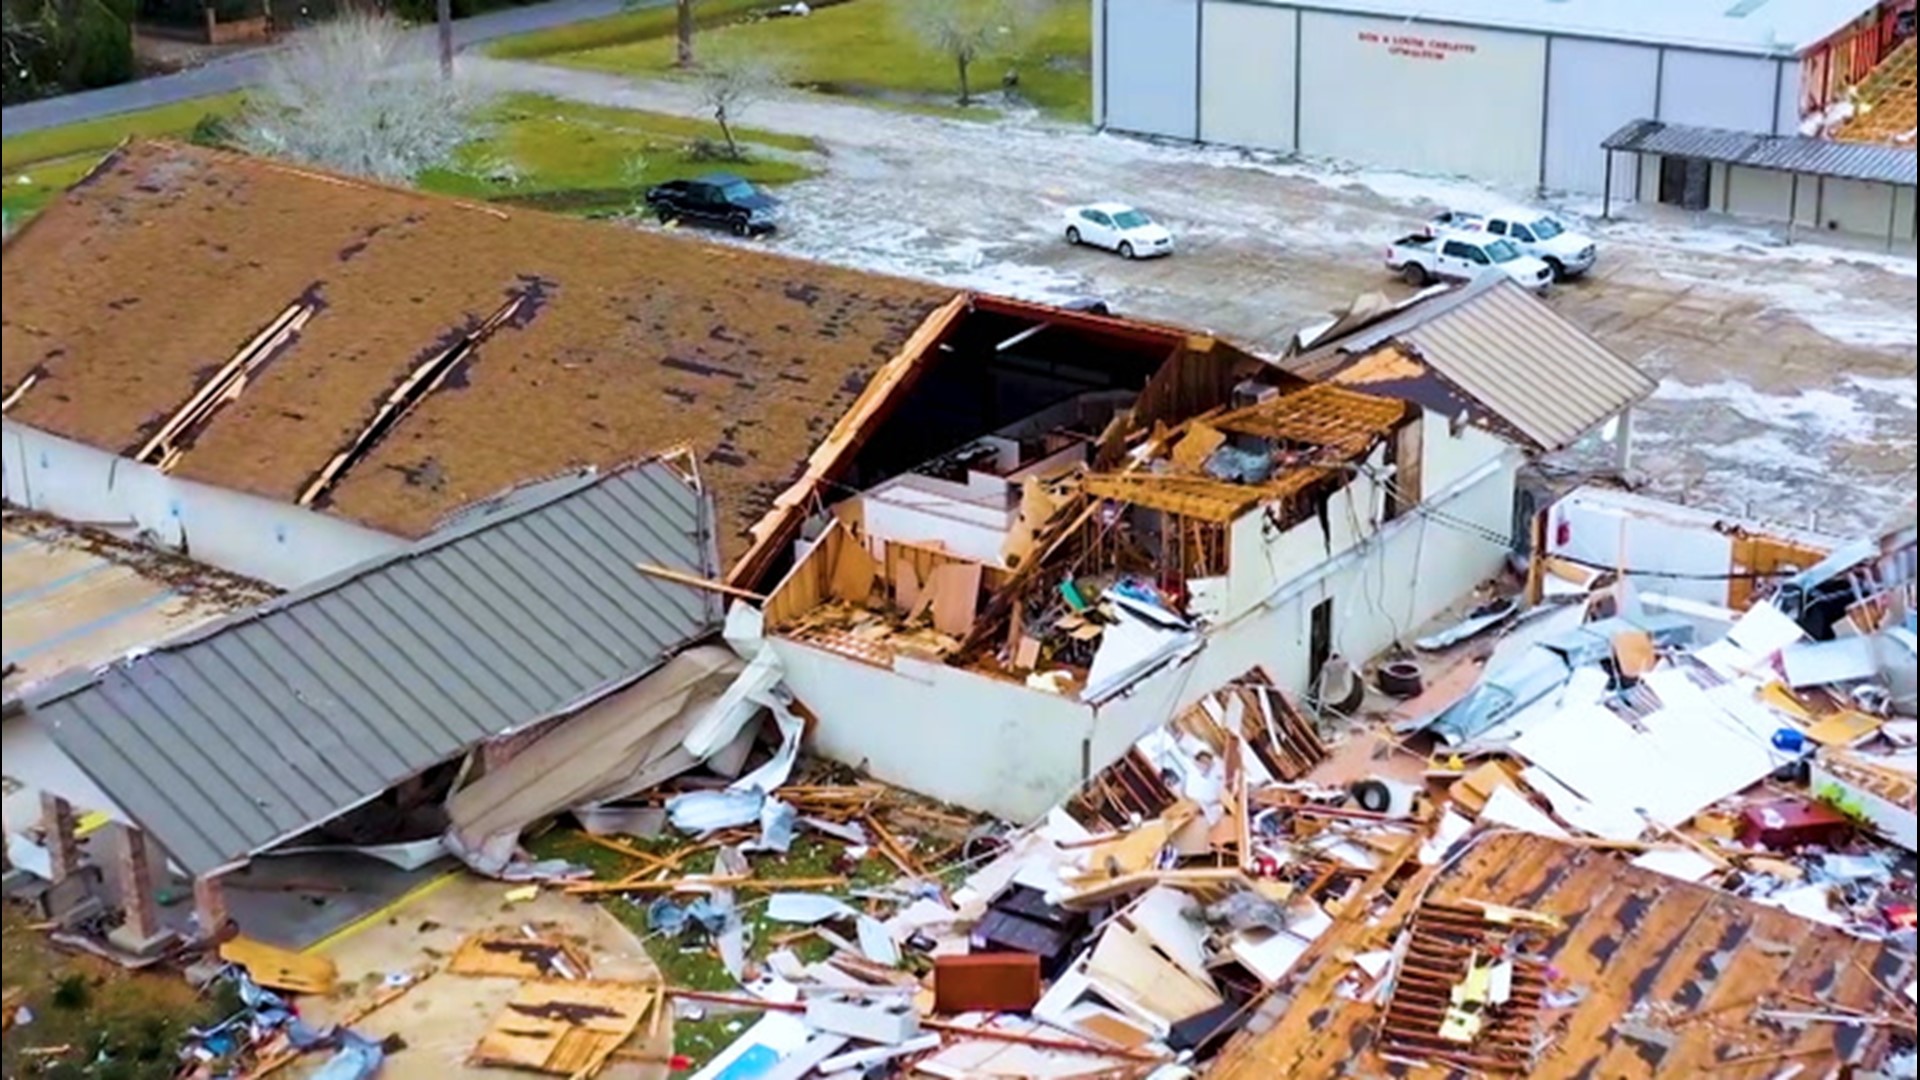 Students at Hope Baptist Church and School returned to class, five weeks after an EF-3 tornado destroyed their classrooms in Alexandria, Louisiana.